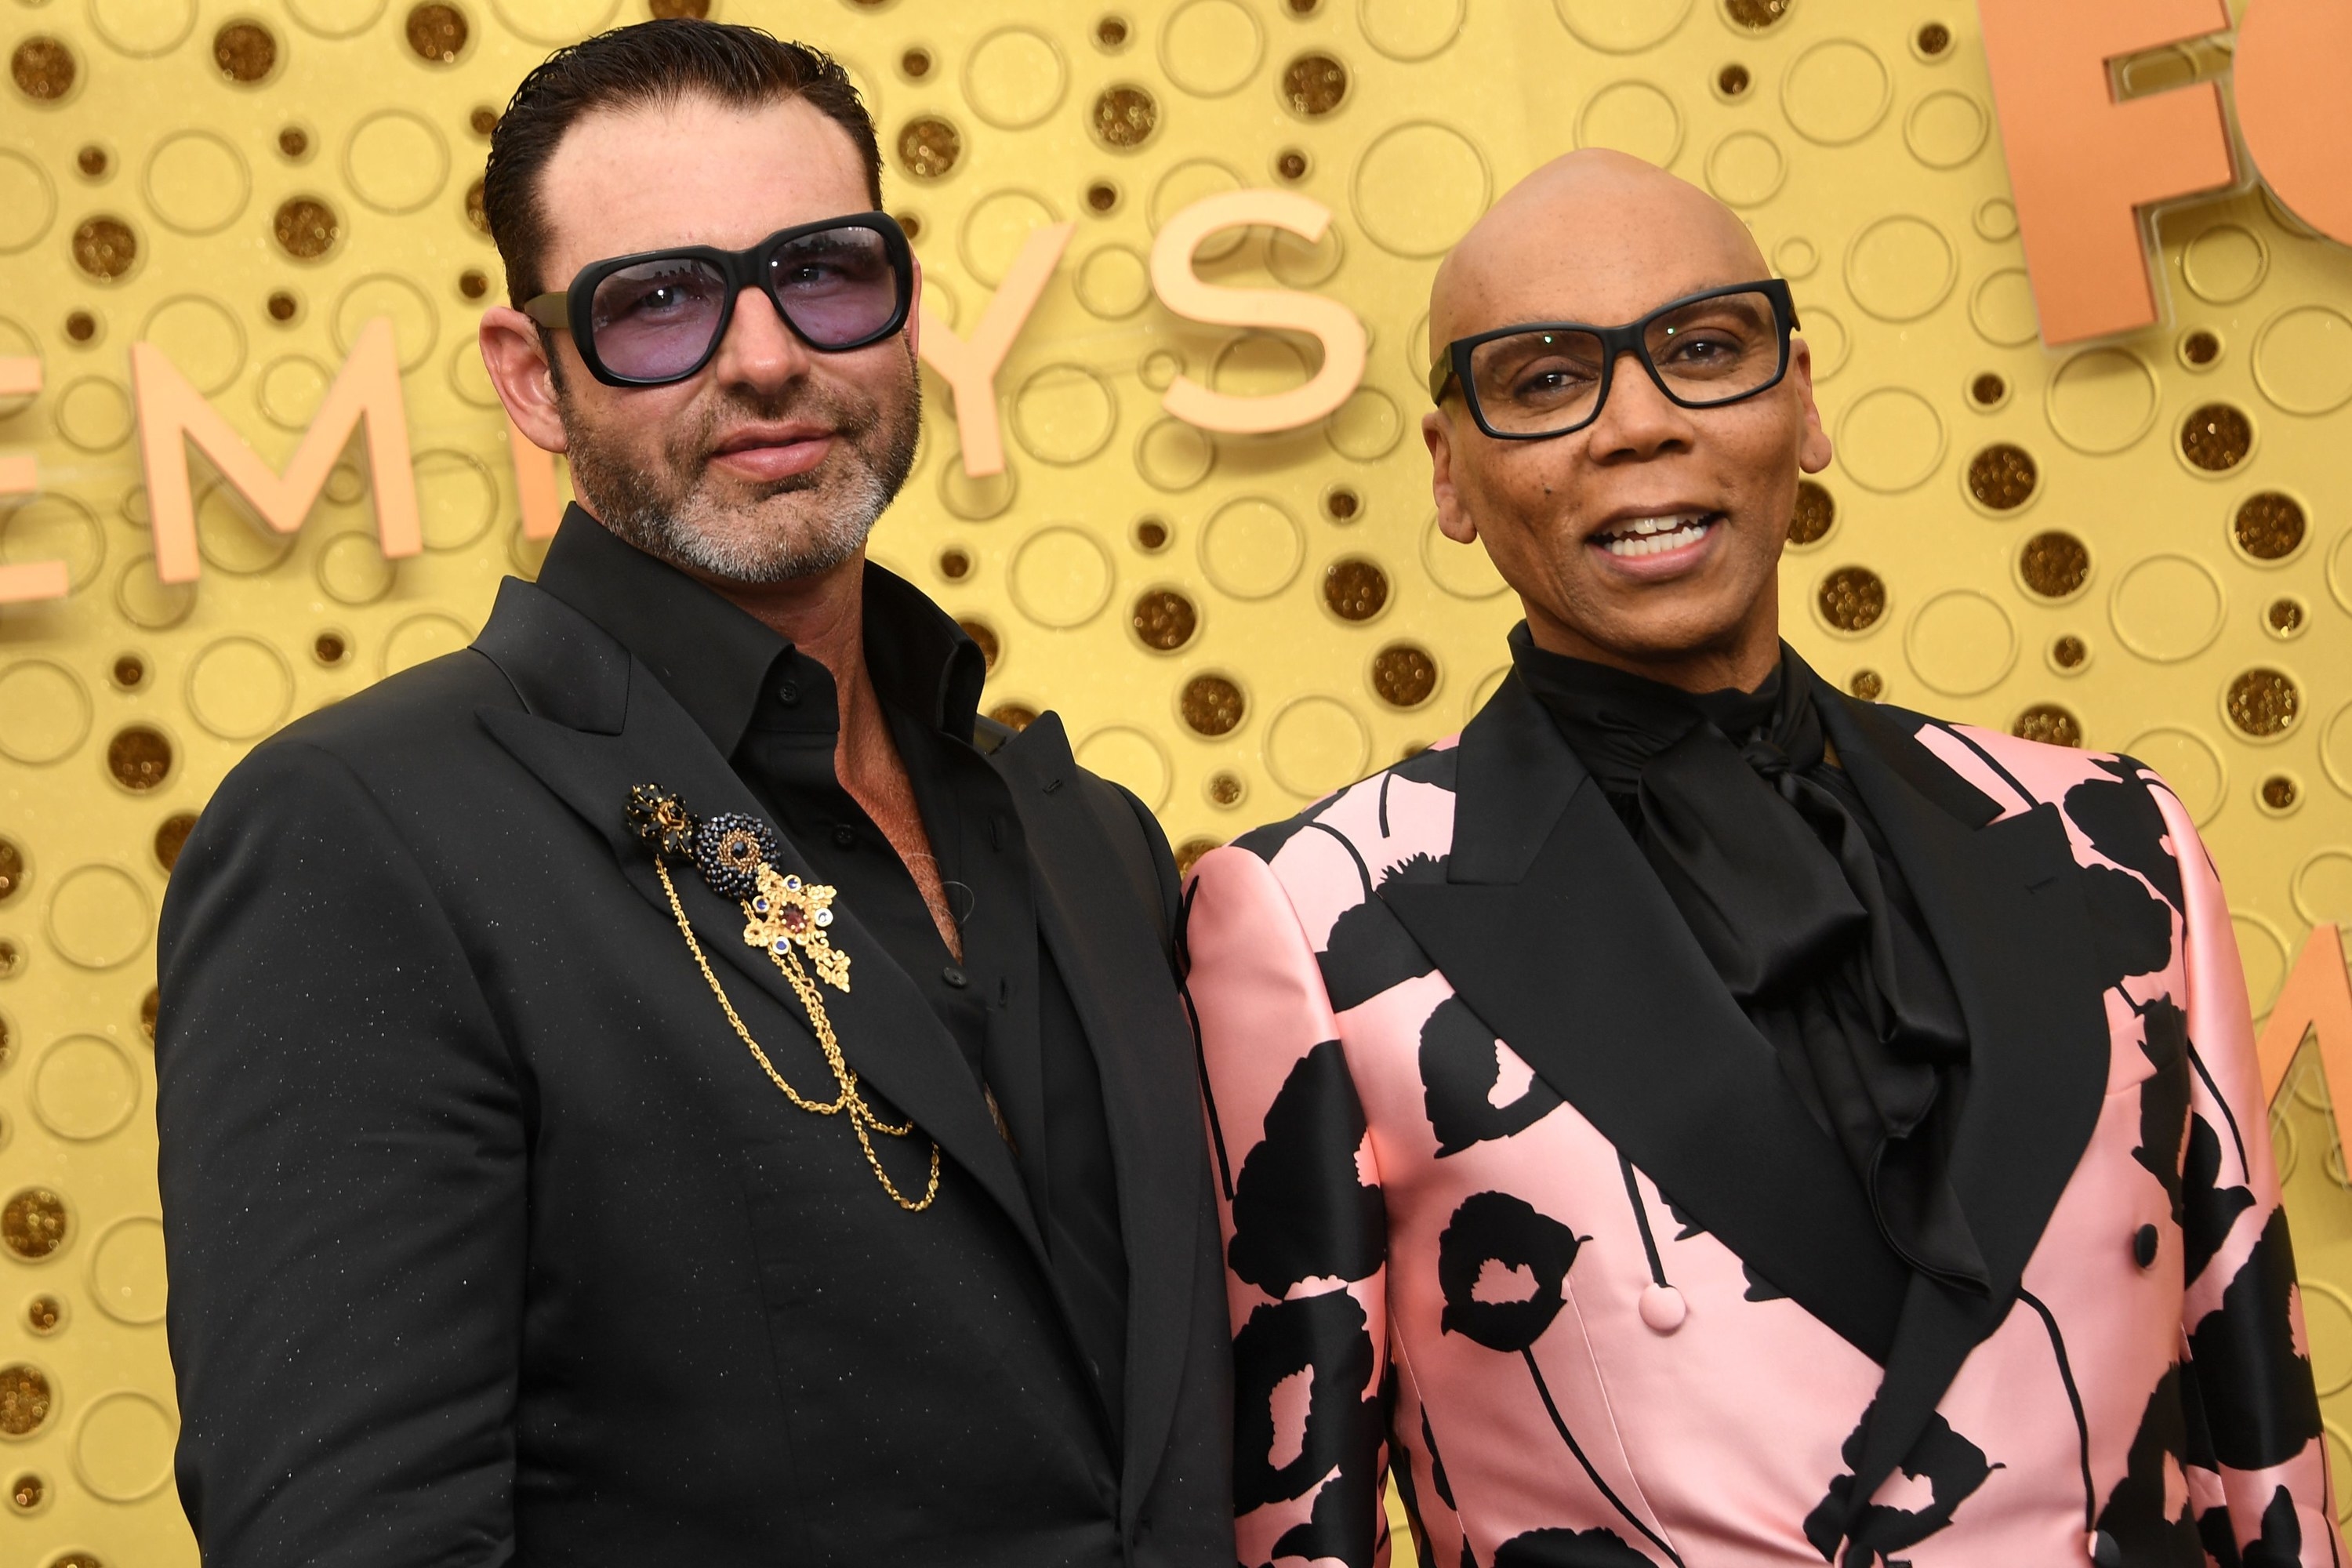 Georges LeBar and RuPaul dressed up